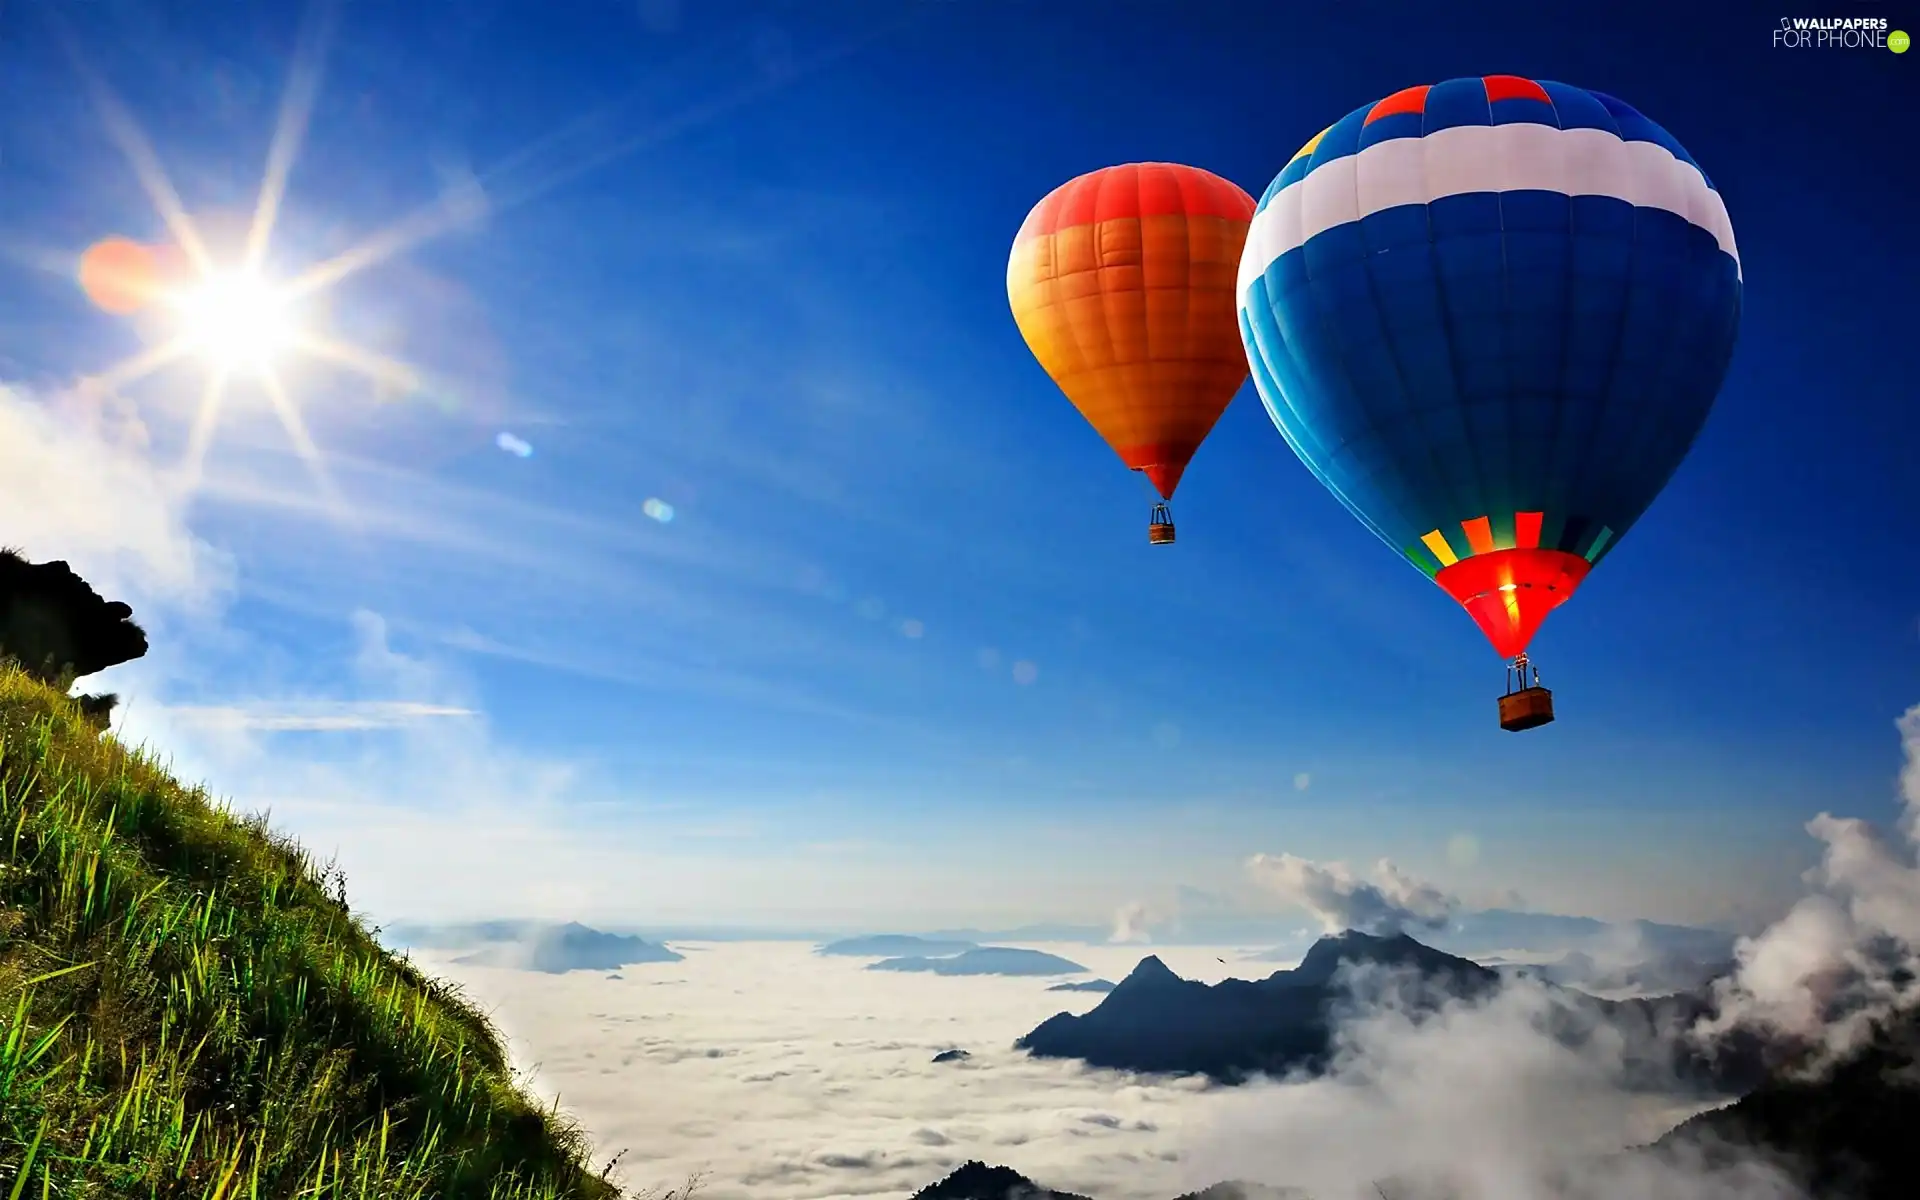 rays, Mountains, color, Balloons, sun, clouds